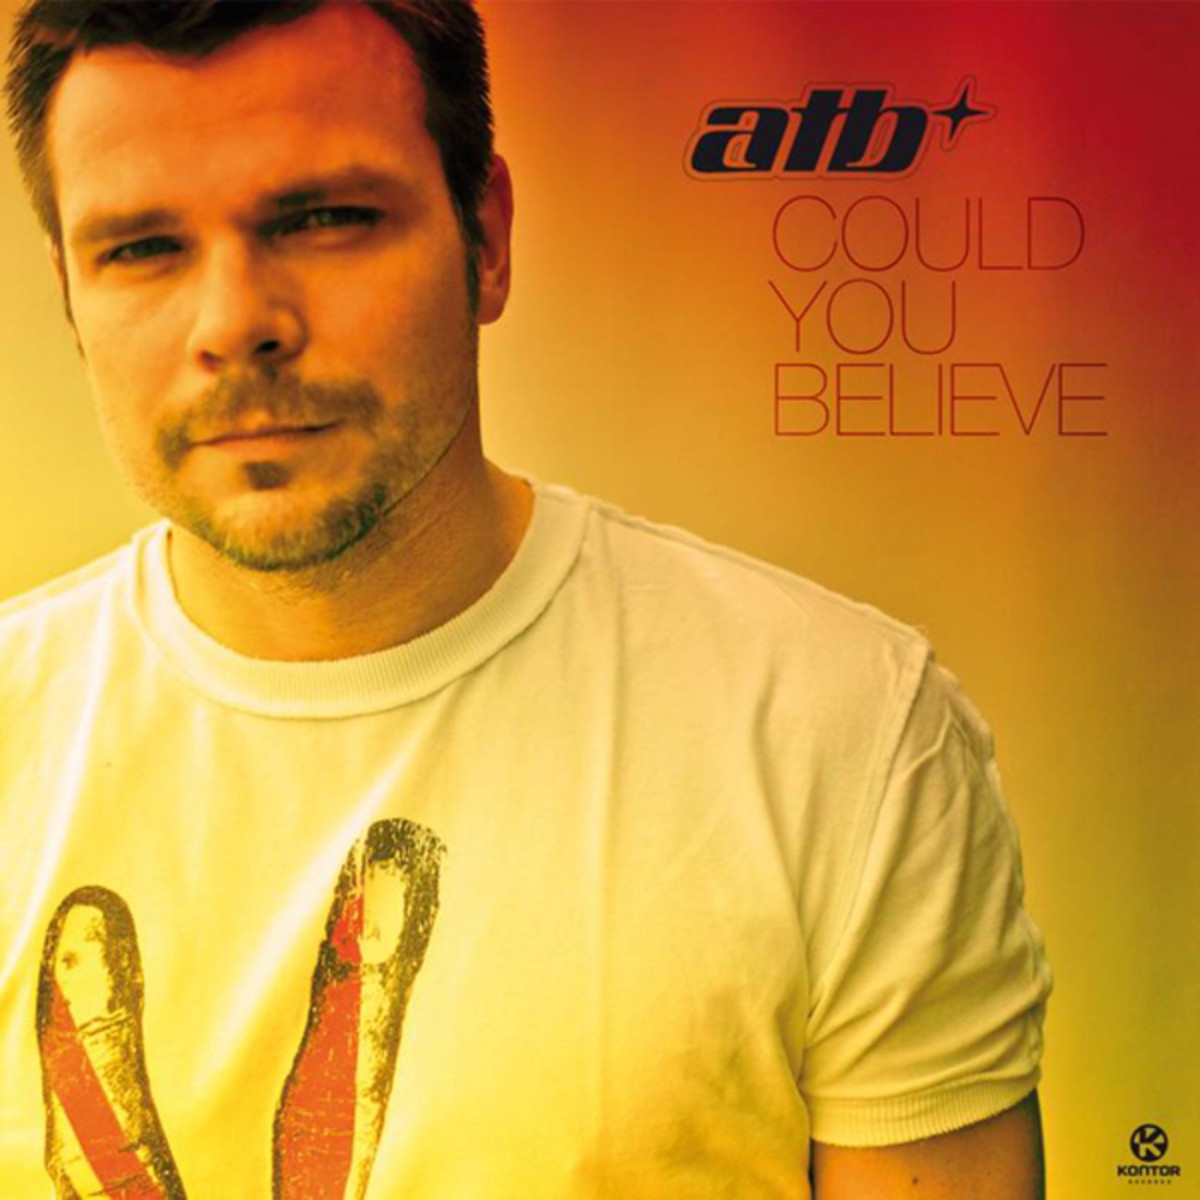 Could You Believe - Airplay Mix